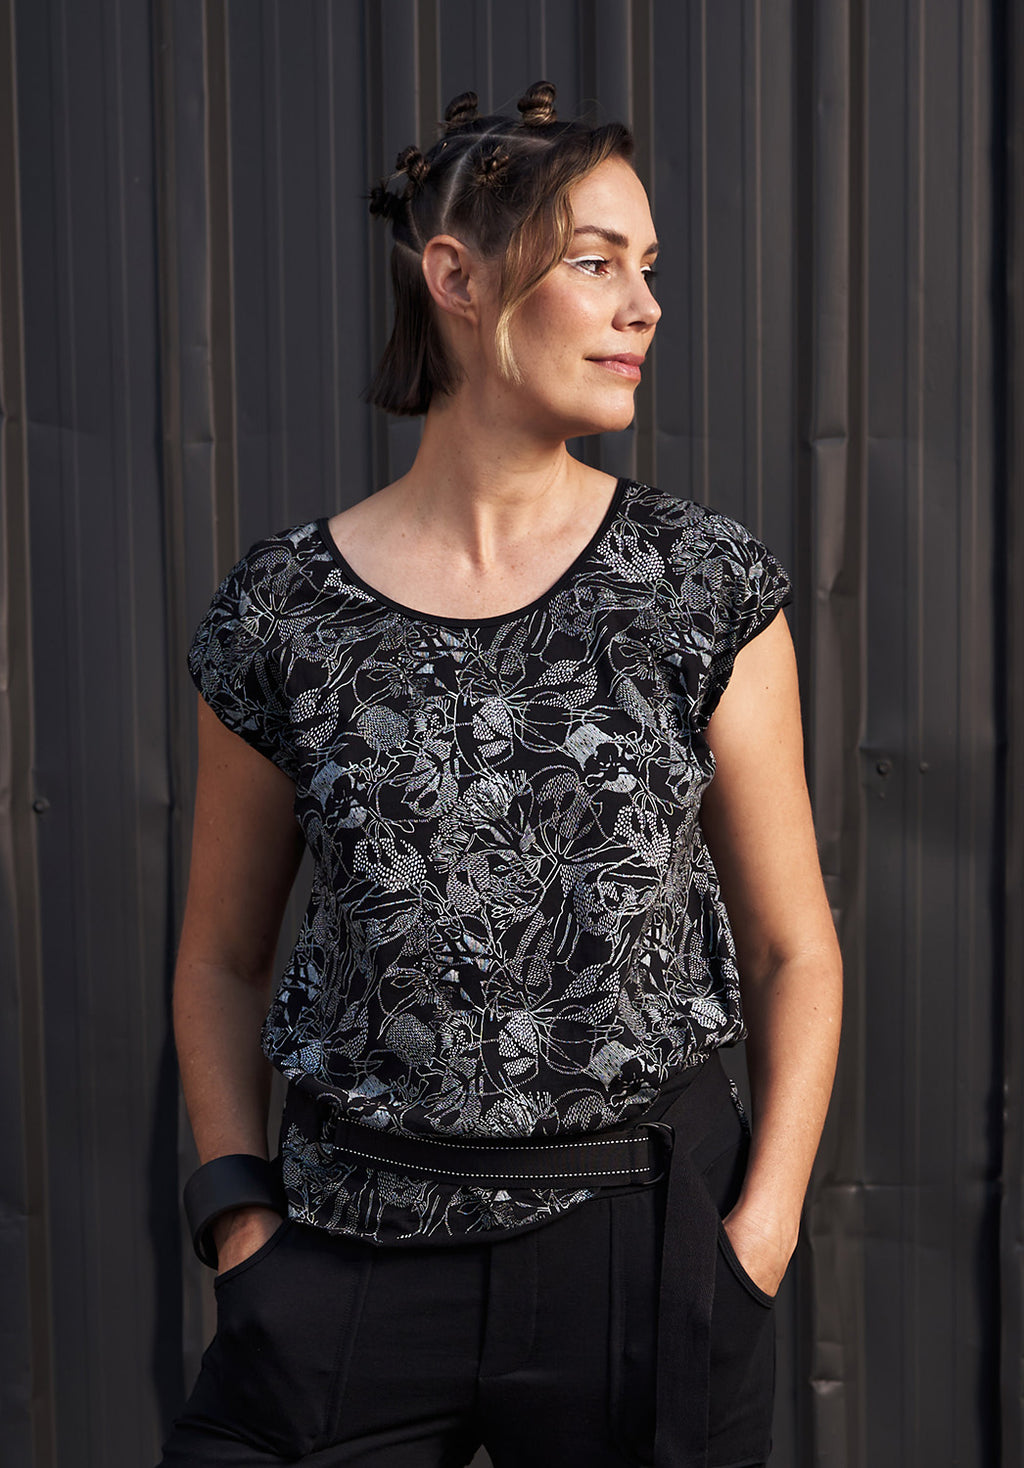 womens top boutique, ethical clothing online, sustainable fashion, womens summer tops australia, ethical clothing designer, vegan fashion